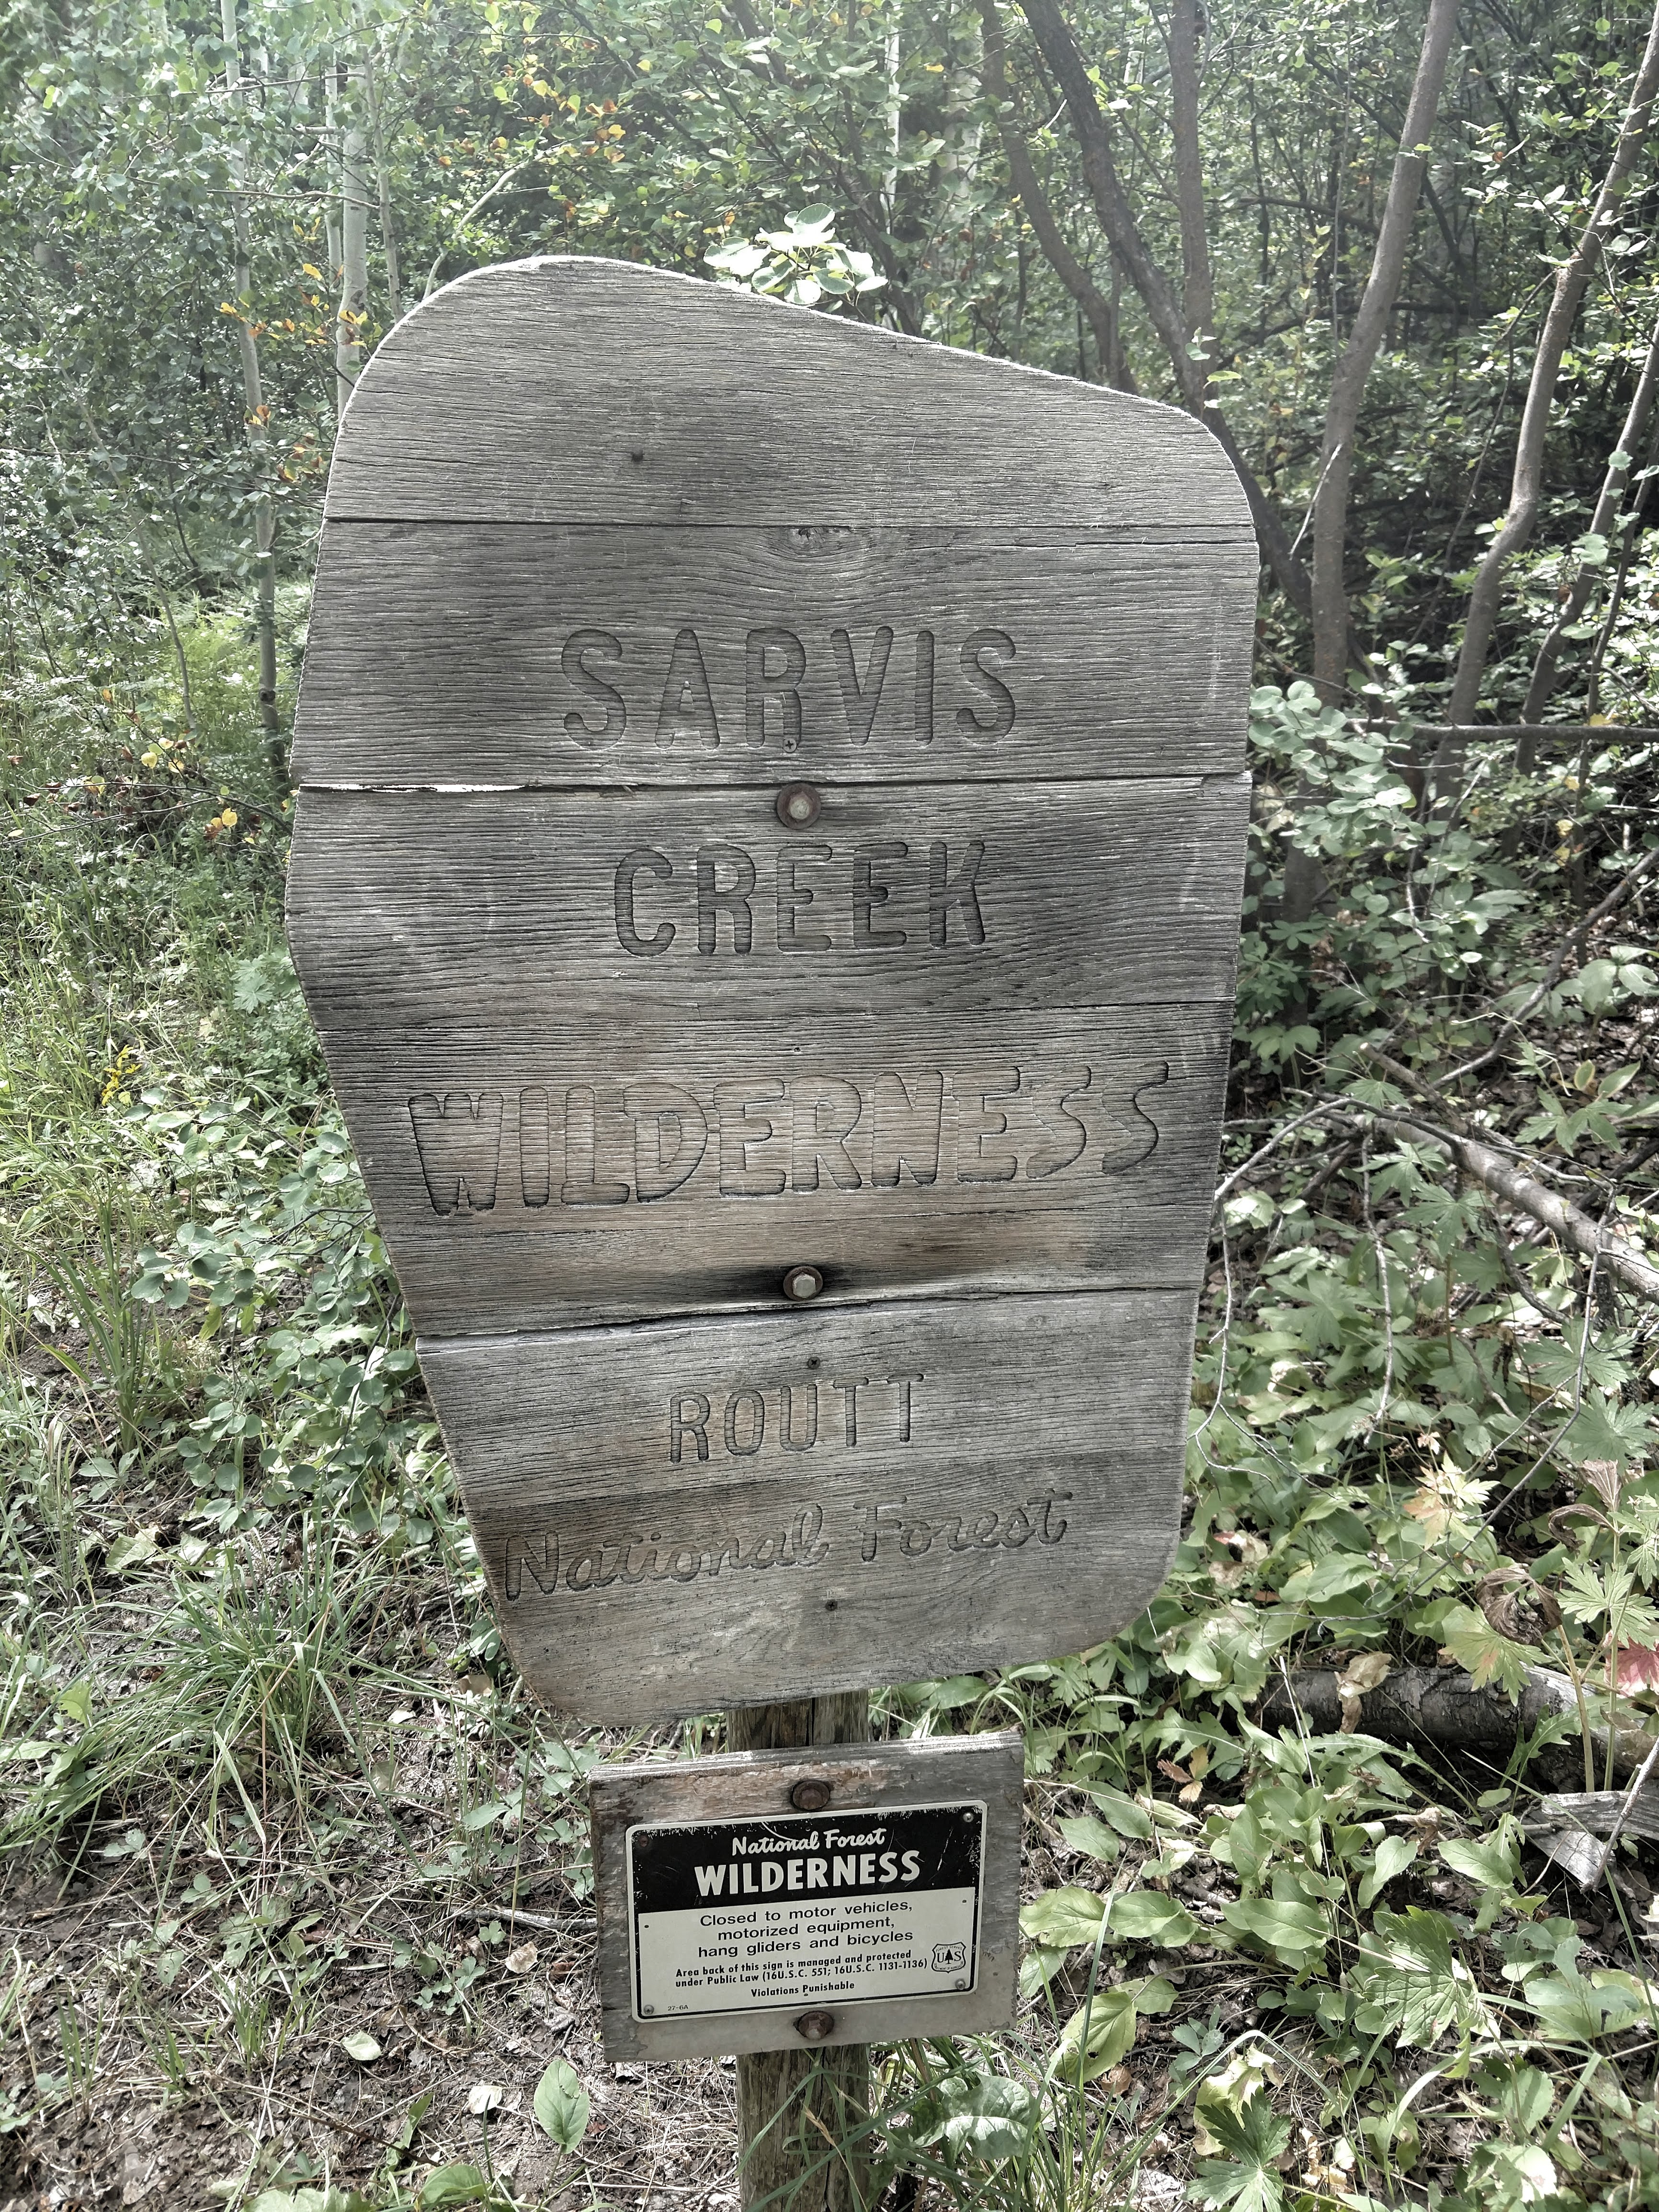 The Sarvis Creek Wilderness, the sign on the way in.